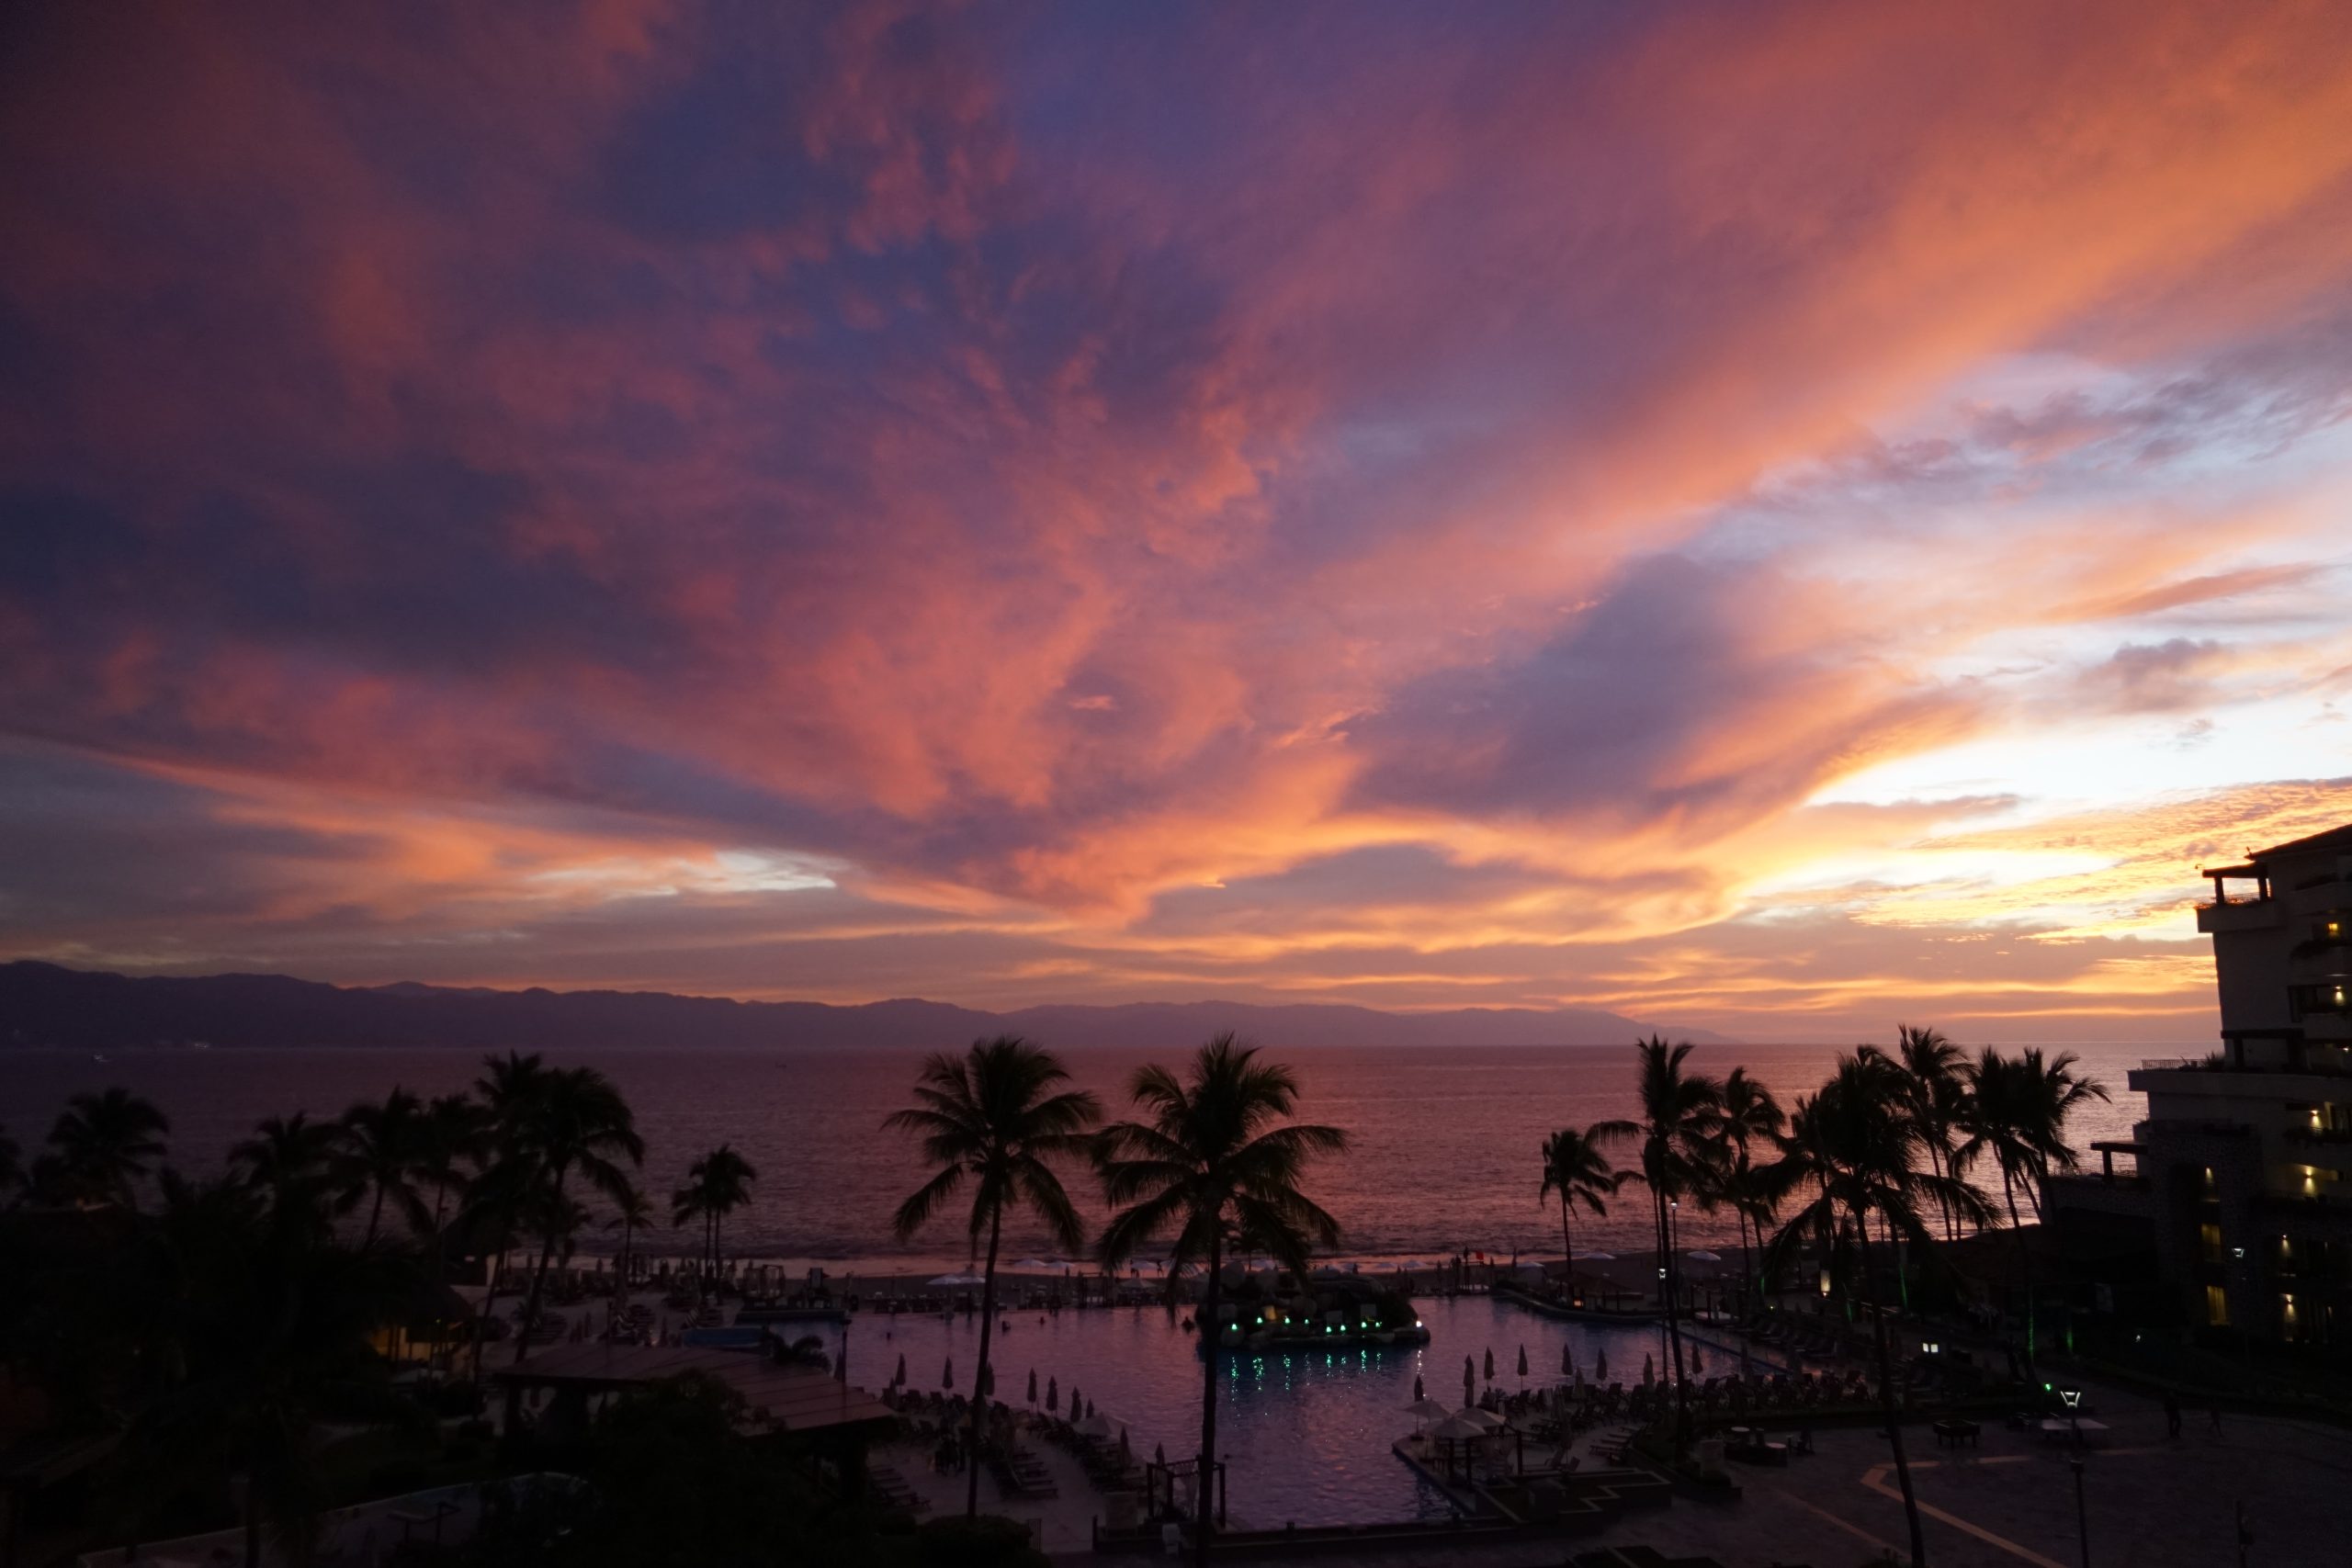 Puerto Vallarta sunsets are breathtakingly beautiful, with stunning colors painting the sky over the ocean.